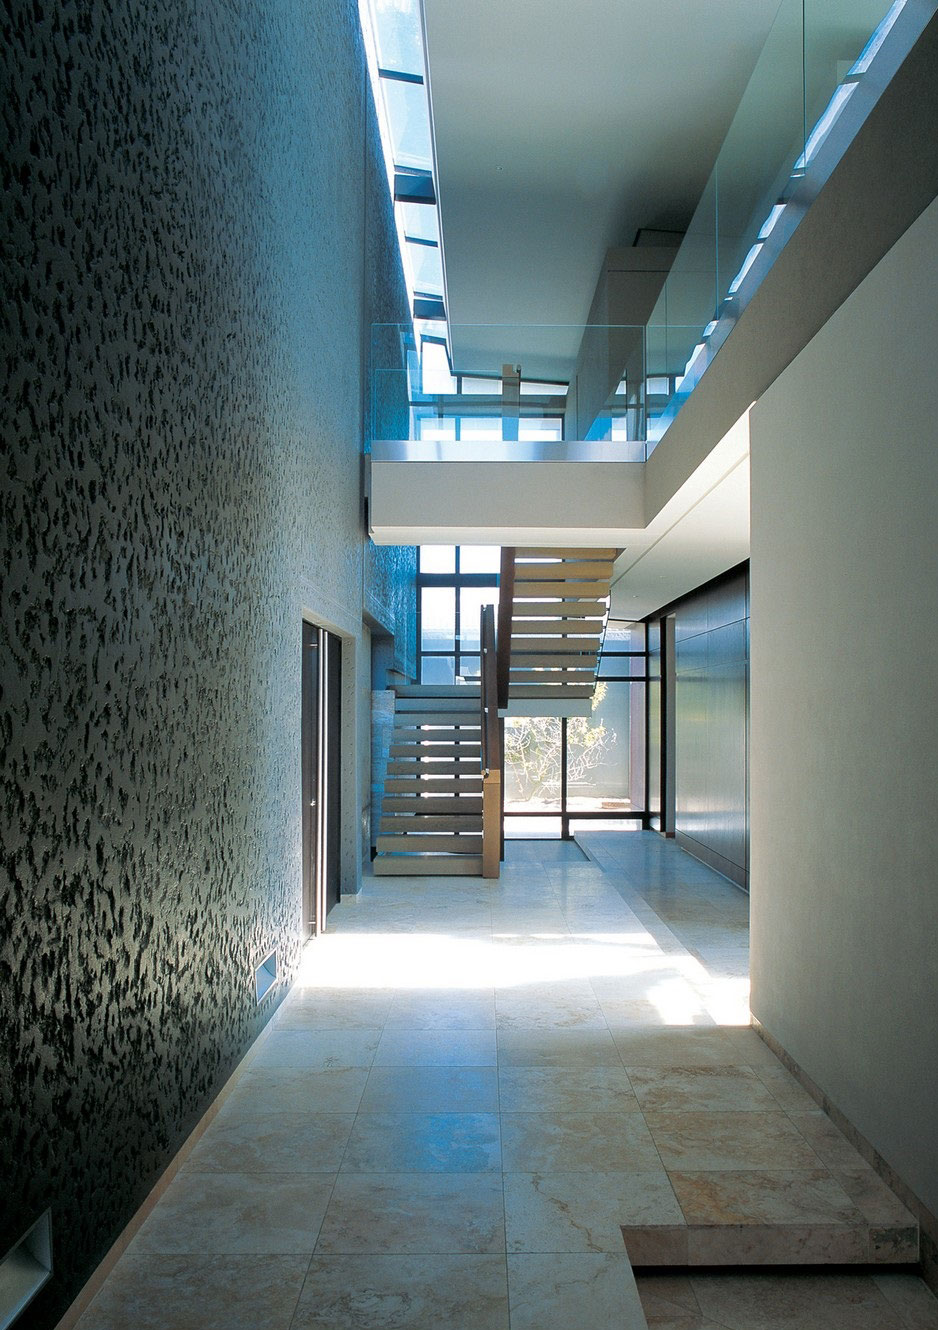 Saota Melkbos With Cozy SAOTA Melkbos Project Hallway With Concrete Floor And Unique Wall Pattern Architecture  Home Design With Rough Landscape Facing Wonderful Seas Views 